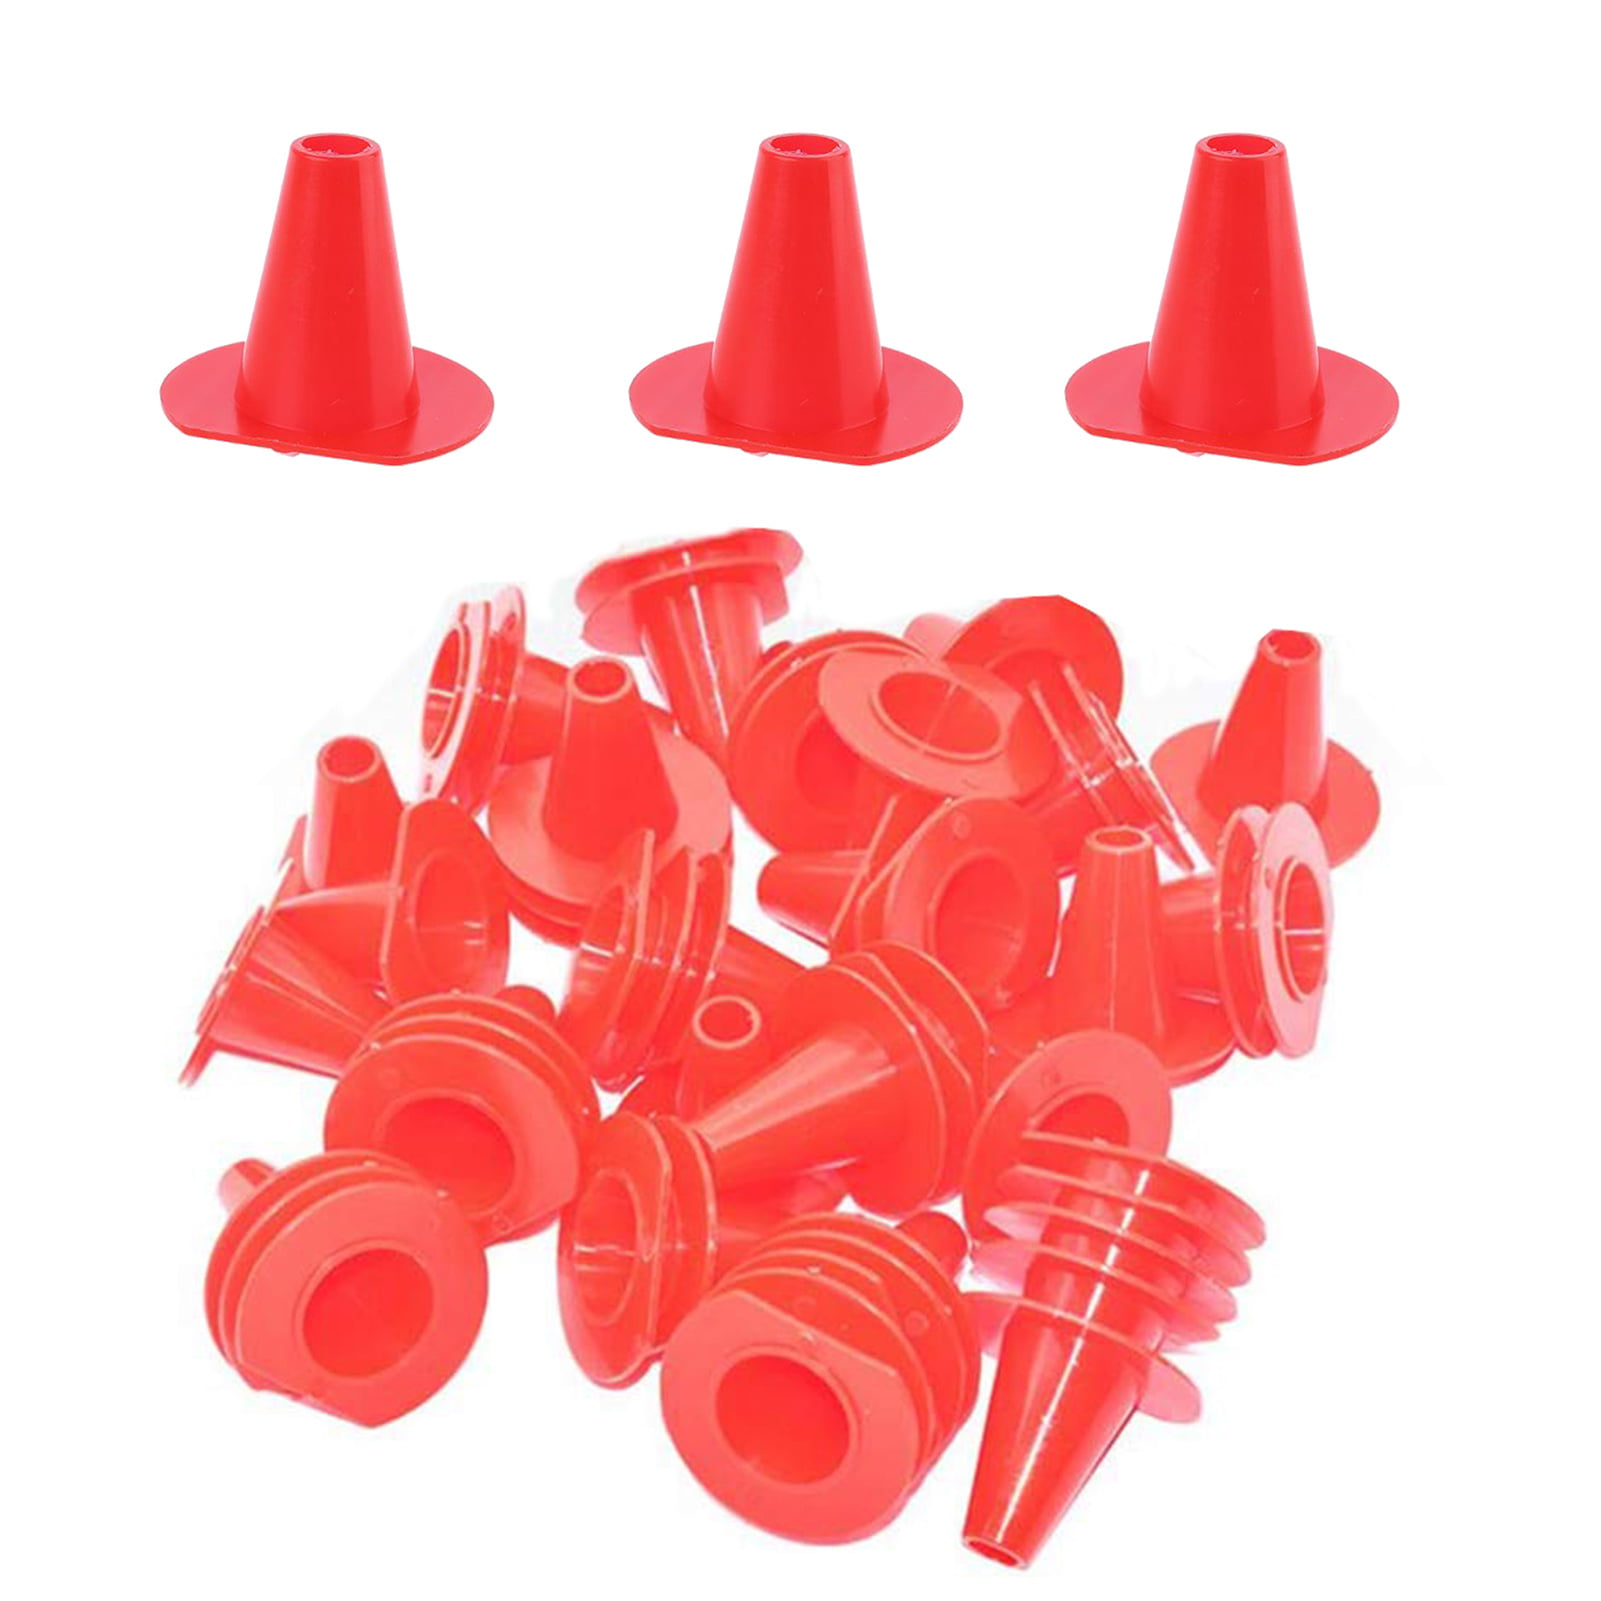 50 Pcs Bee Escape Cone Plastic Device Beekeeping In Out Control Tools Set NEW 